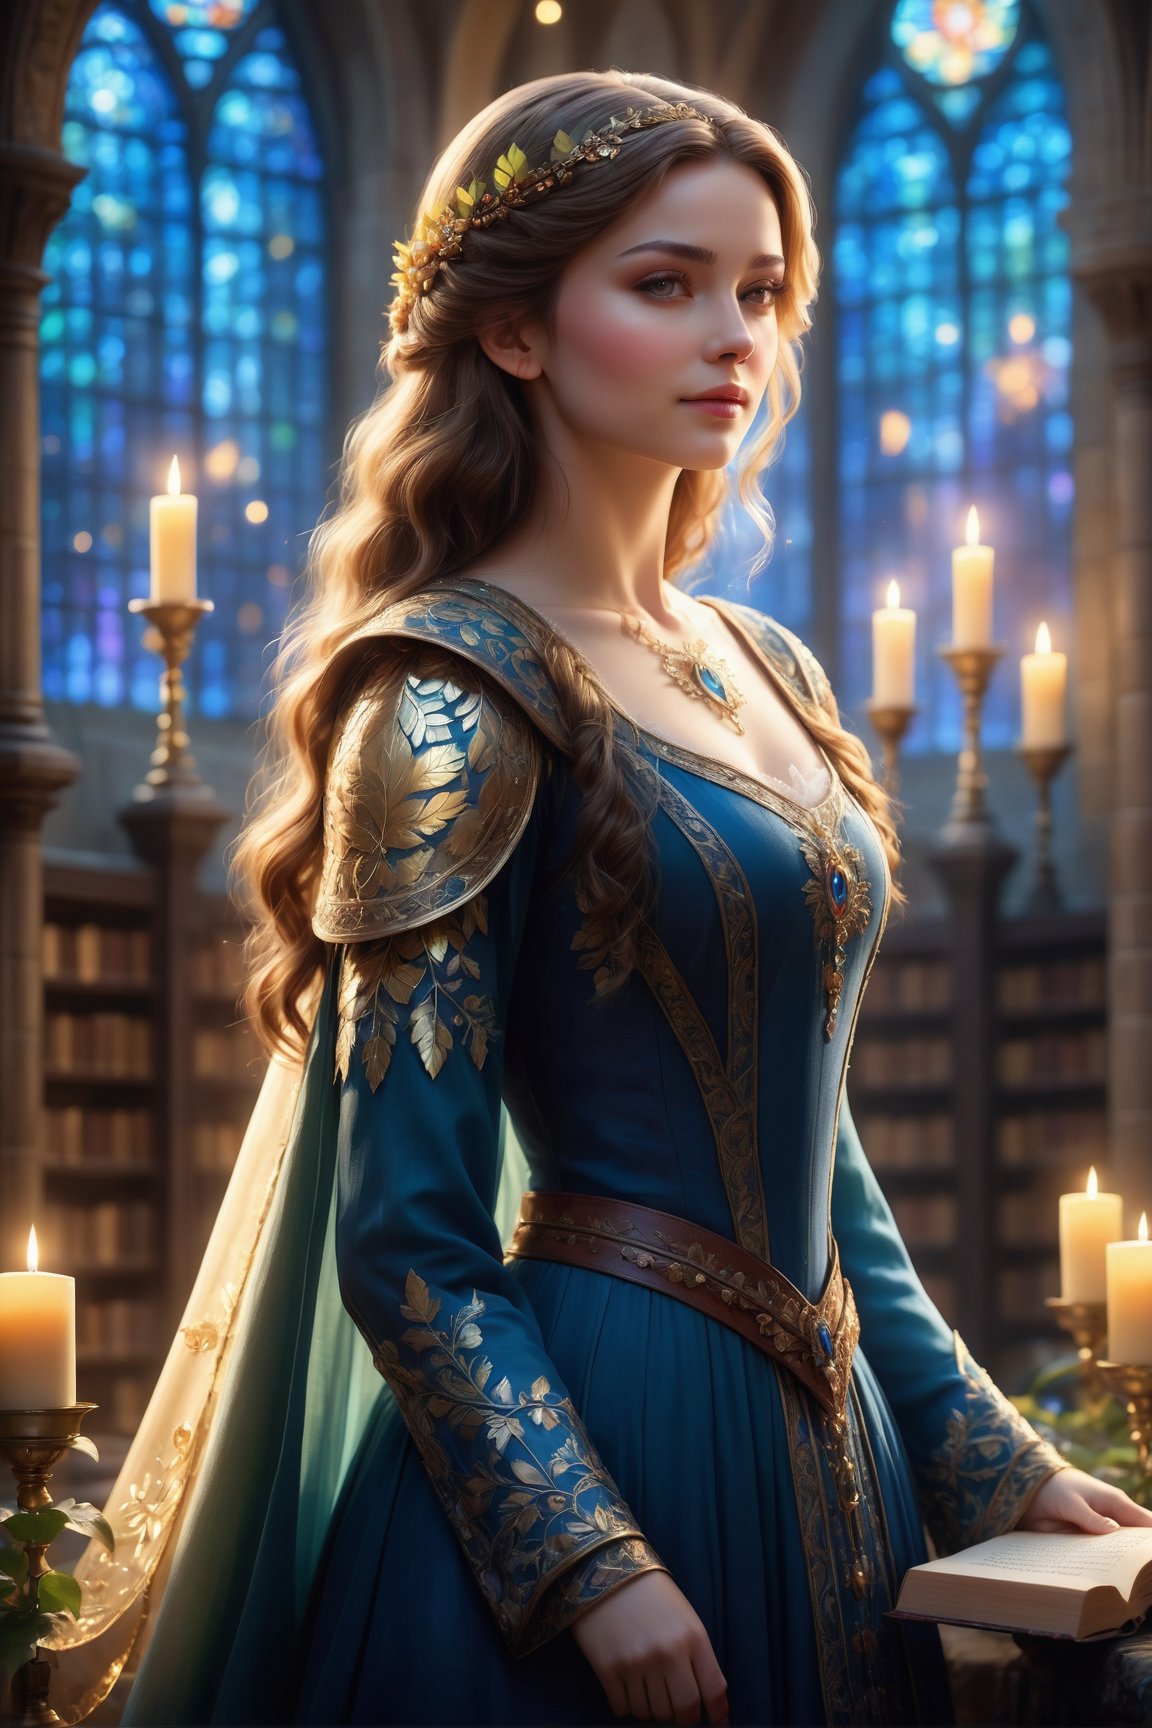 Generate a masterpiece image of a regal animated character with layered, chestnut brown hair that cascades down her shoulders, embellished with a golden hairpiece resembling leaves and berries. (divine proportion), non-douche smile. Her eyes should be a striking blue, large and expressive, framed with long, delicate lashes. Her attire is a richly detailed armor with ornate, golden filigree designs, featuring intricate patterns and embedded with sapphire-like gemstones. The character is poised elegantly, exuding a noble aura, with soft light filtering through a stained glass window casting warm hues around her. Her expression is serene and composed, with a slight blush on her cheeks and a faint smile on her lips. The background is a grand, medieval library with rows of ancient books and flickering candles, creating an atmosphere of old-world charm and mystique. by Skyrn99, full body, (((rule of thirds))), high quality, high detail, high resolution, (bokeh:2), backlight

